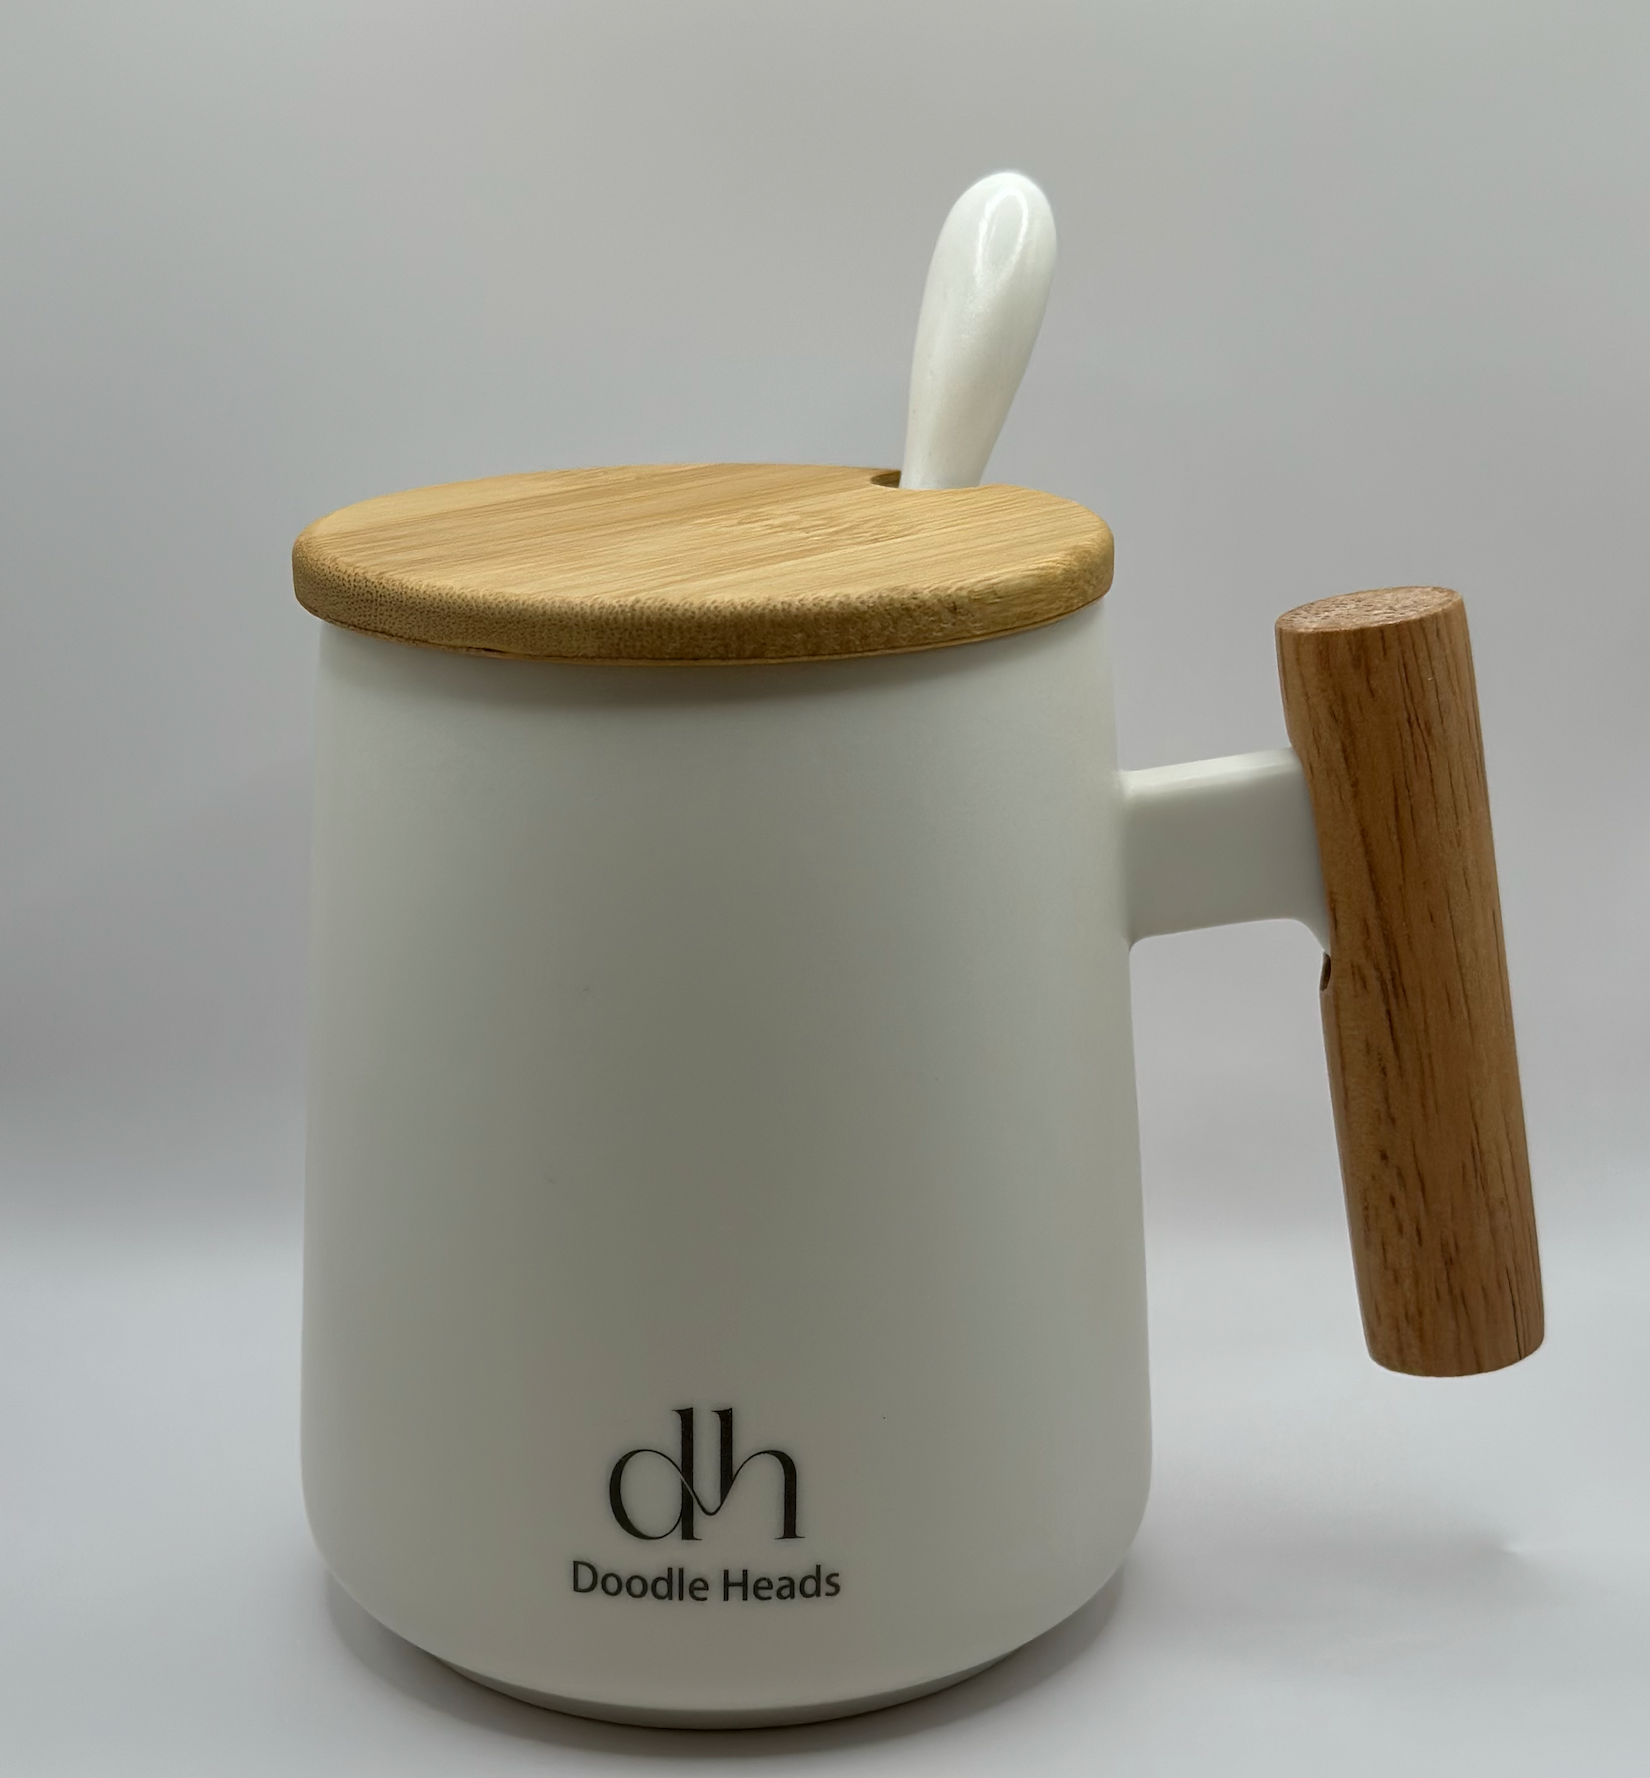 dh Bamboo Handle & Lid Coffee Mug with spoon (in a gift box)